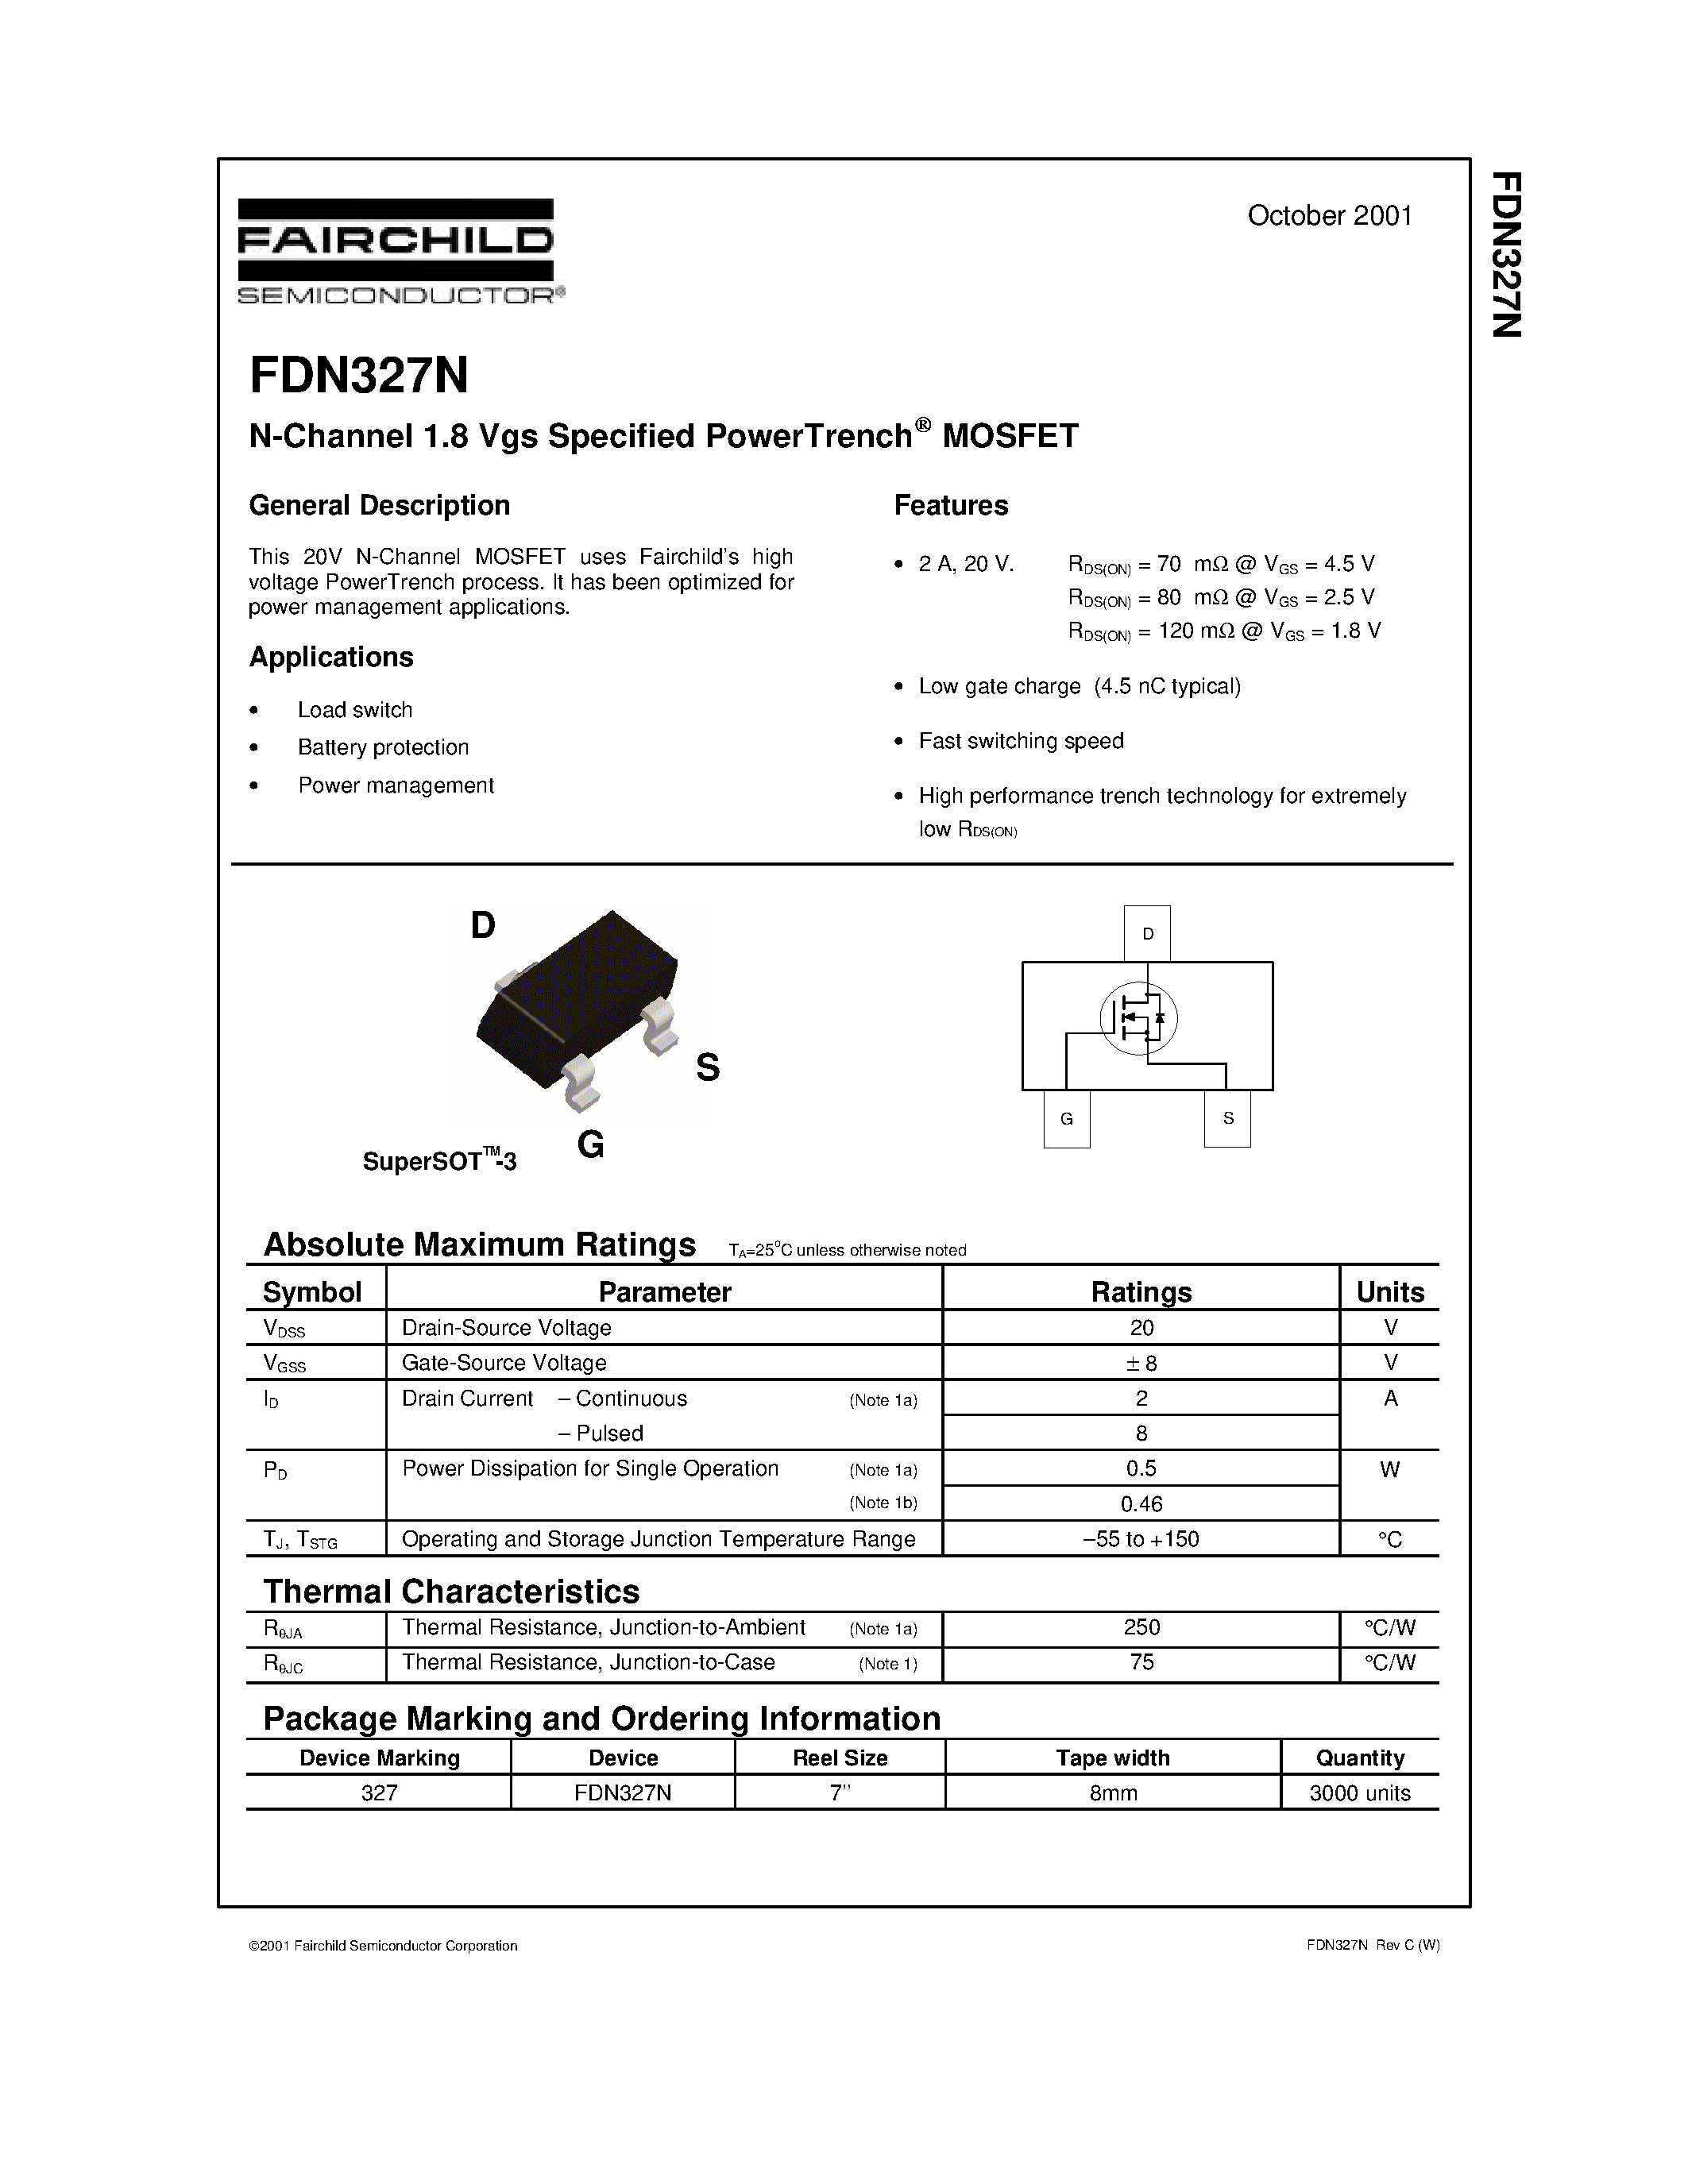 Datasheet FDN327N - N-Channel 1.8 Vgs Specified PowerTrench MOSFET page 1